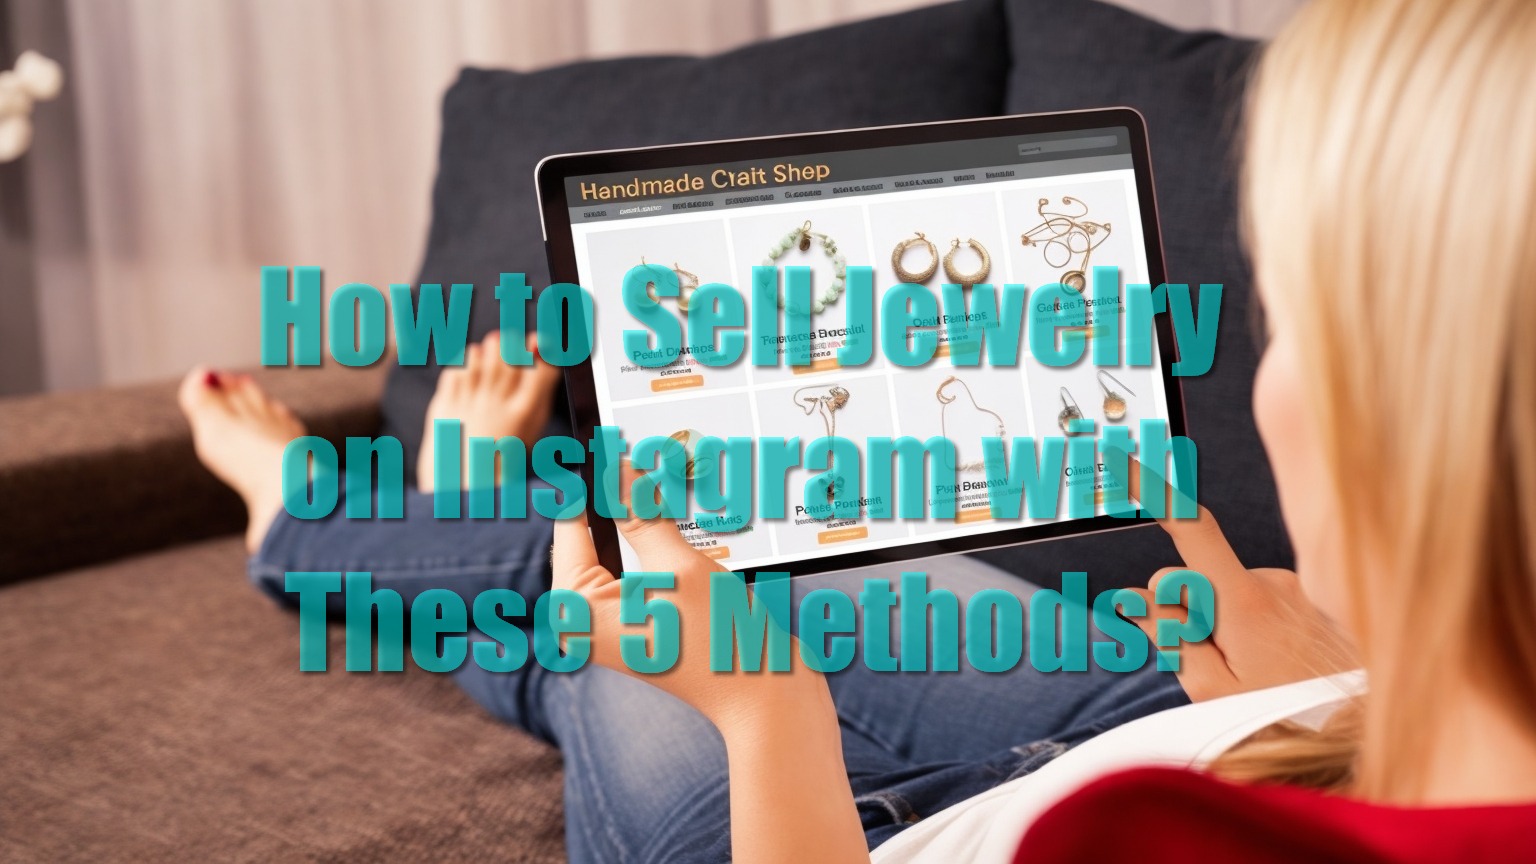 How to Sell Jewelry on Instagram with These 5 Methods?